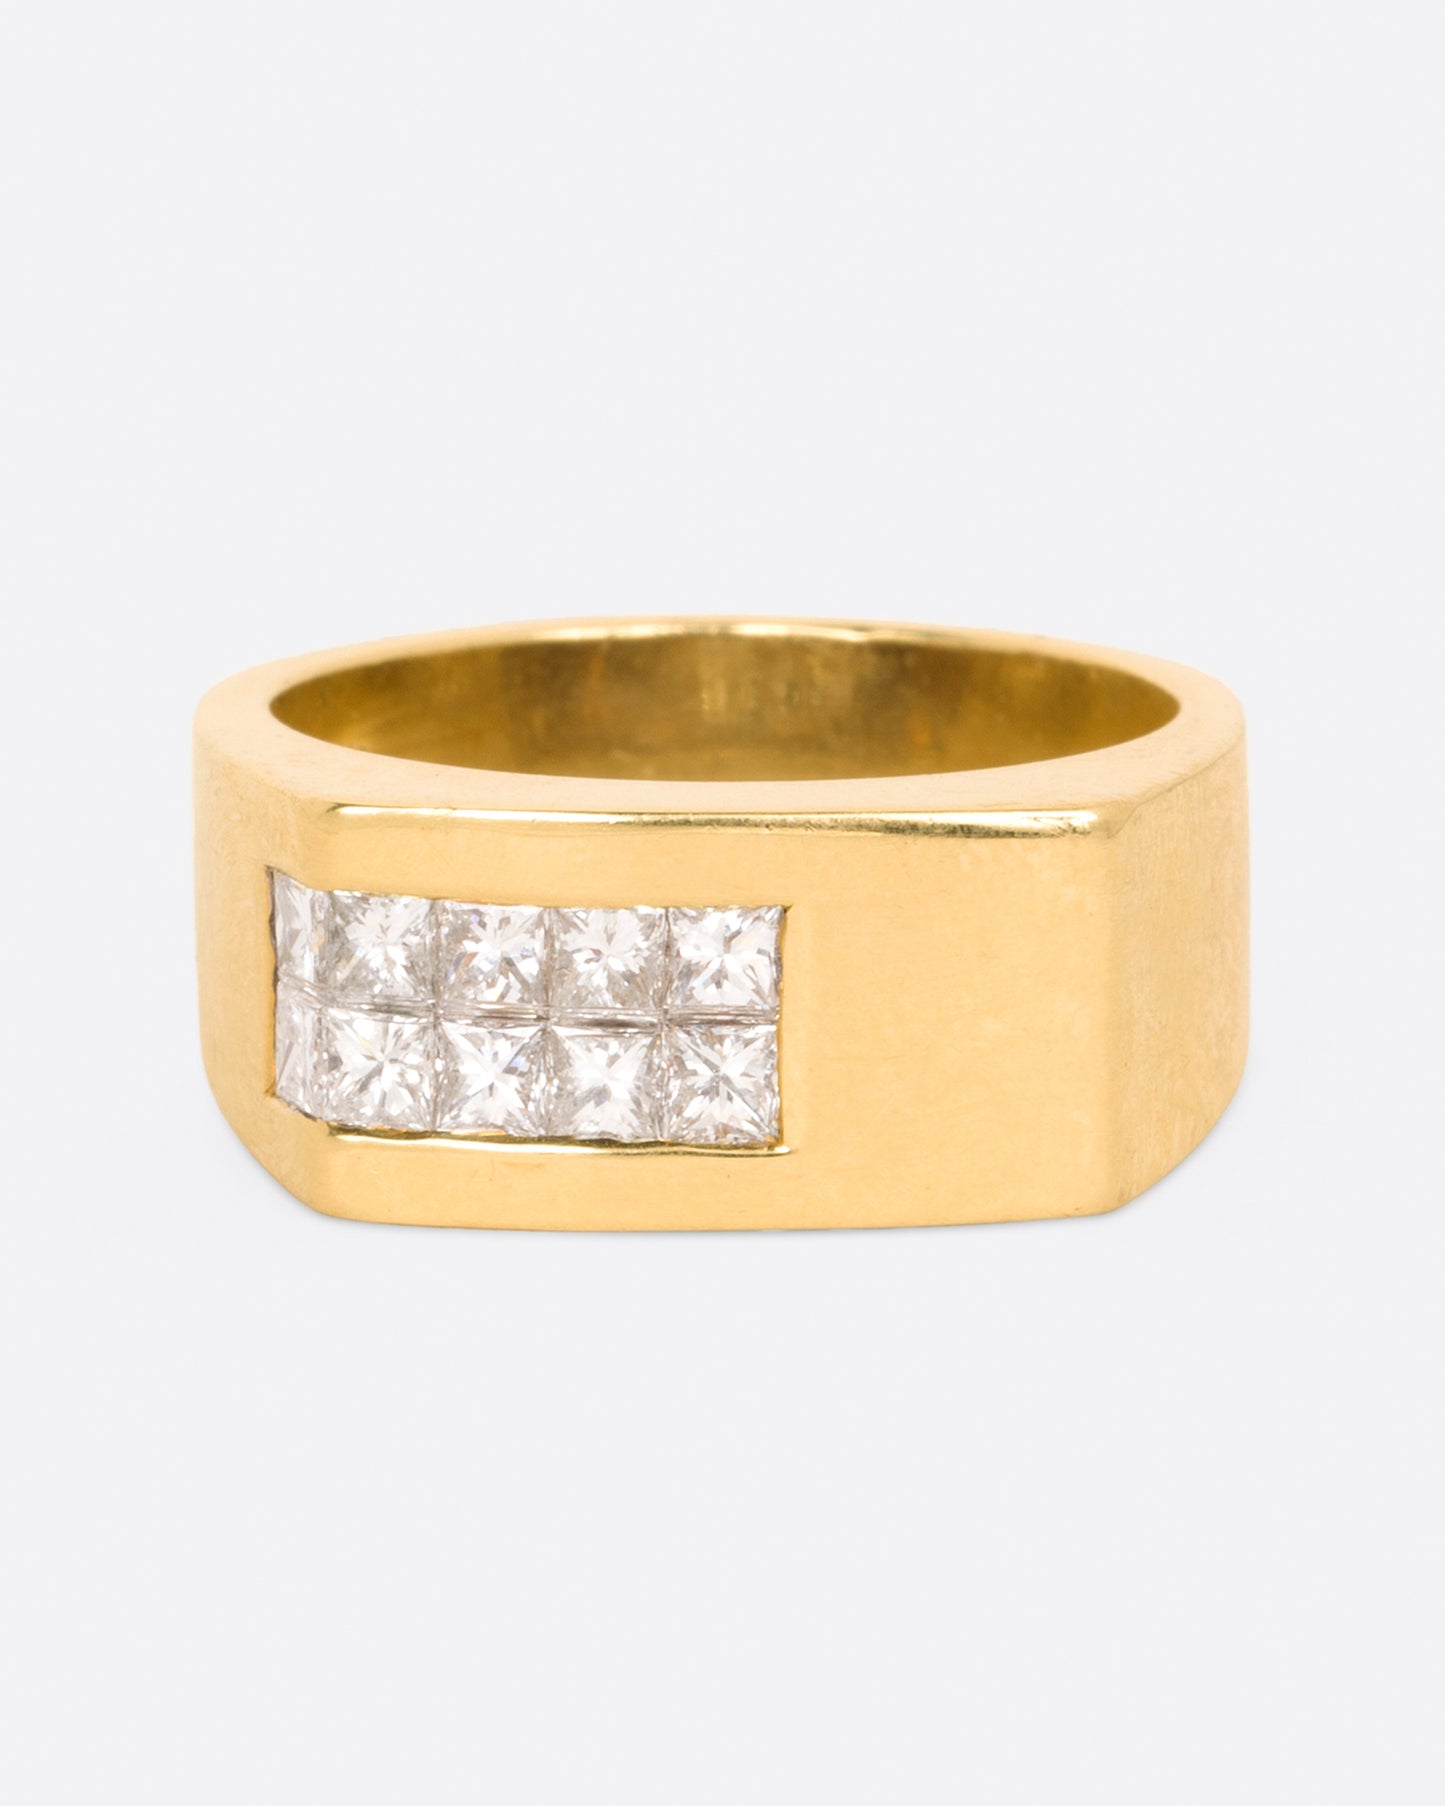 A yellow gold rectangular signet ring with 10 princess cut diamonds on one corner, shown from the front.